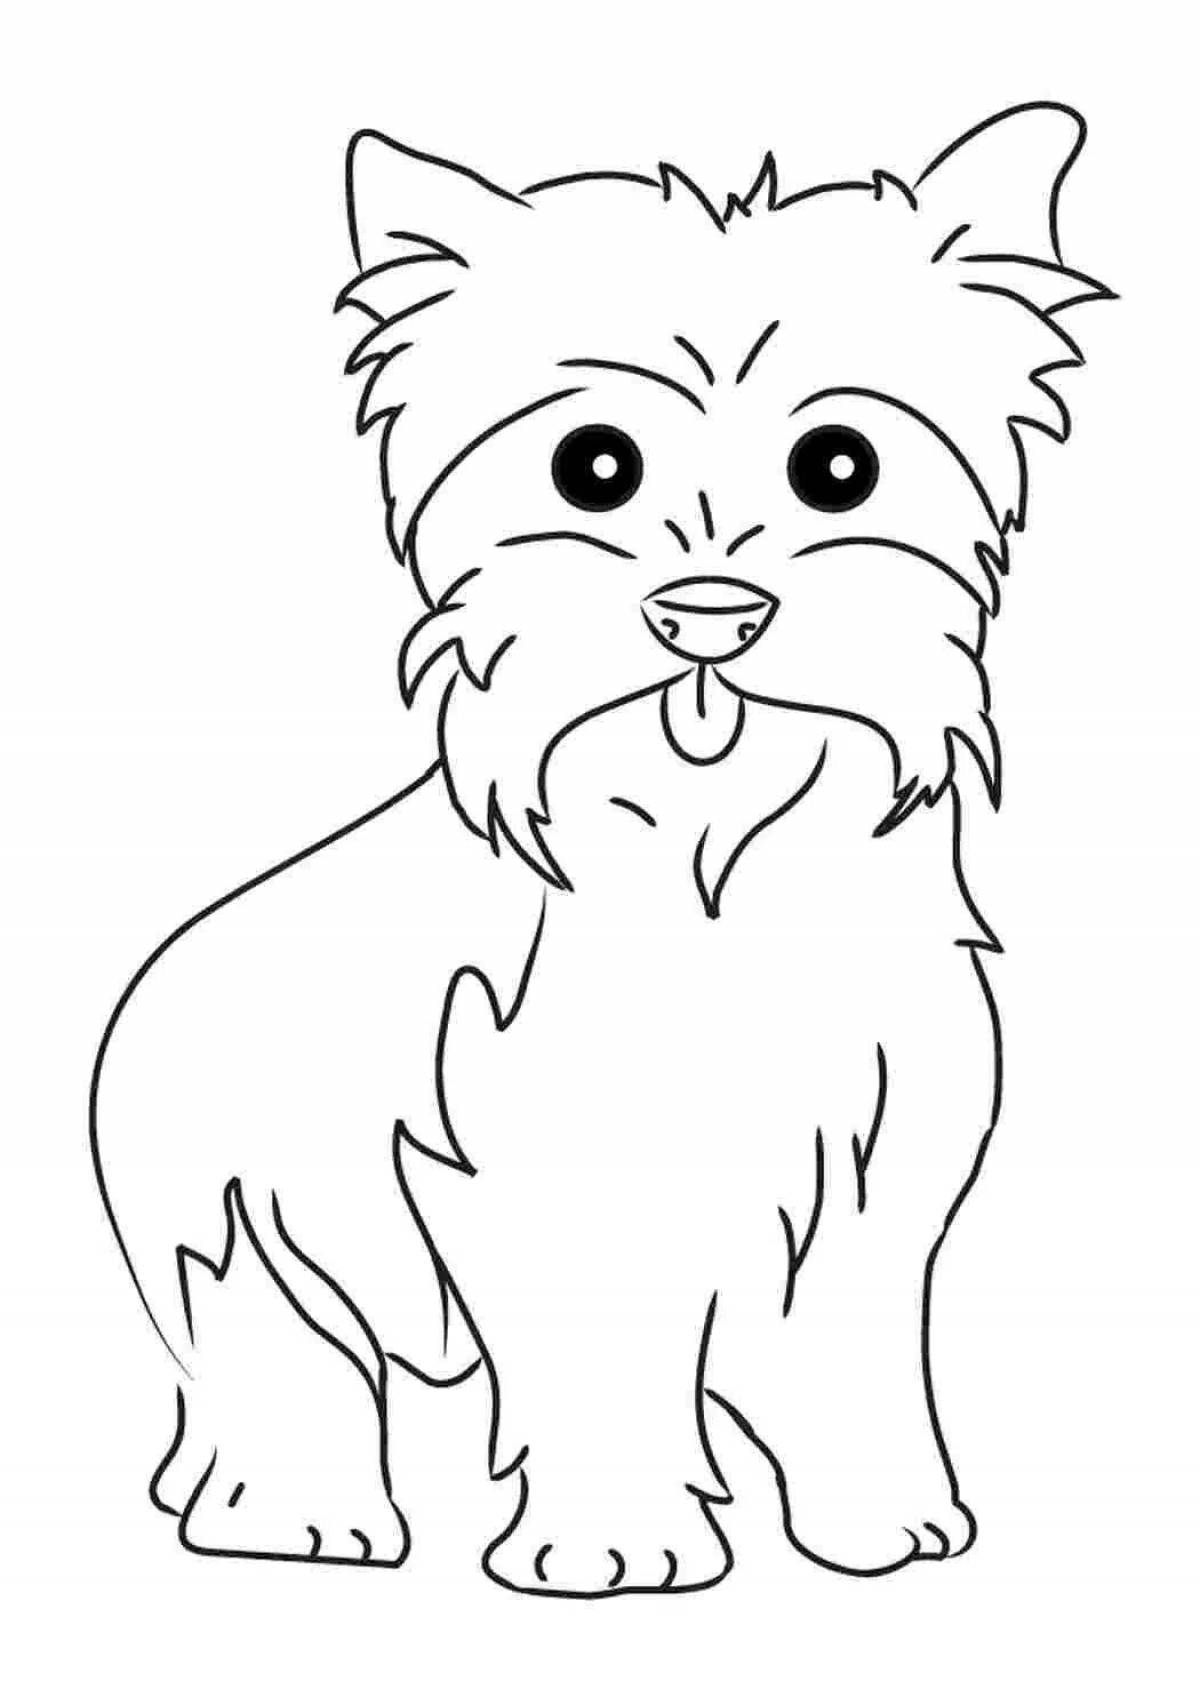 Great fluffy spy coloring book